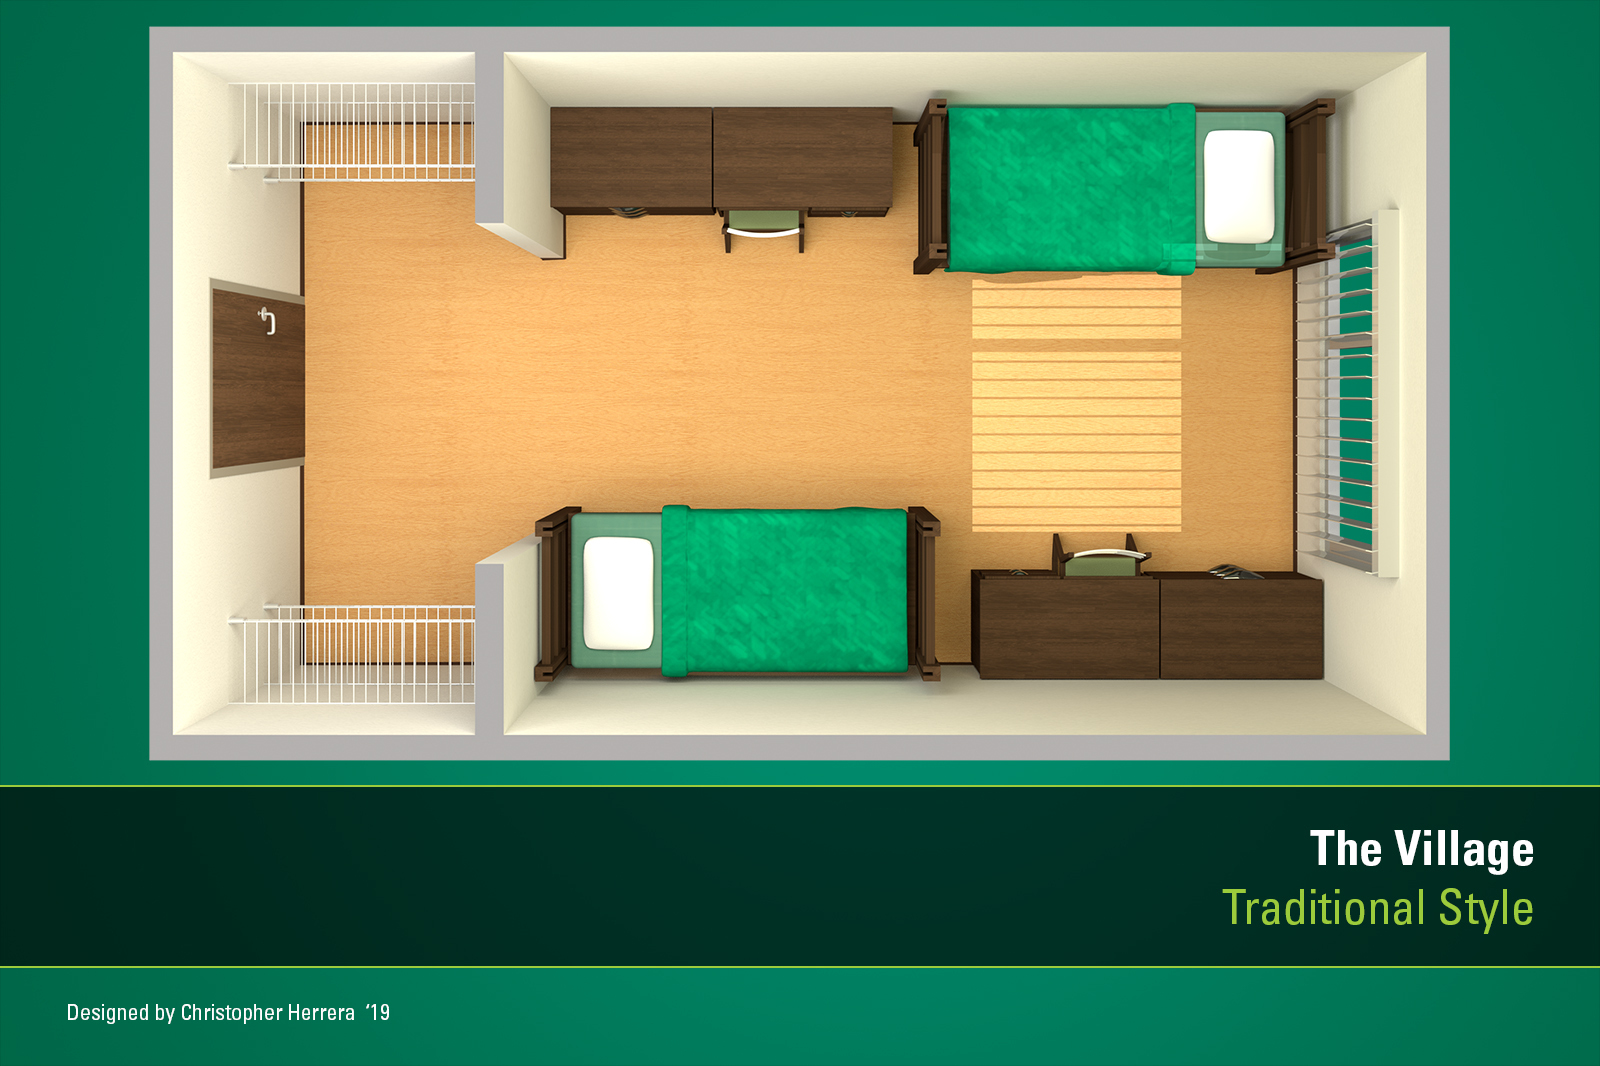 USF's Tampa Campus housing apartment floor plan for The Village. 